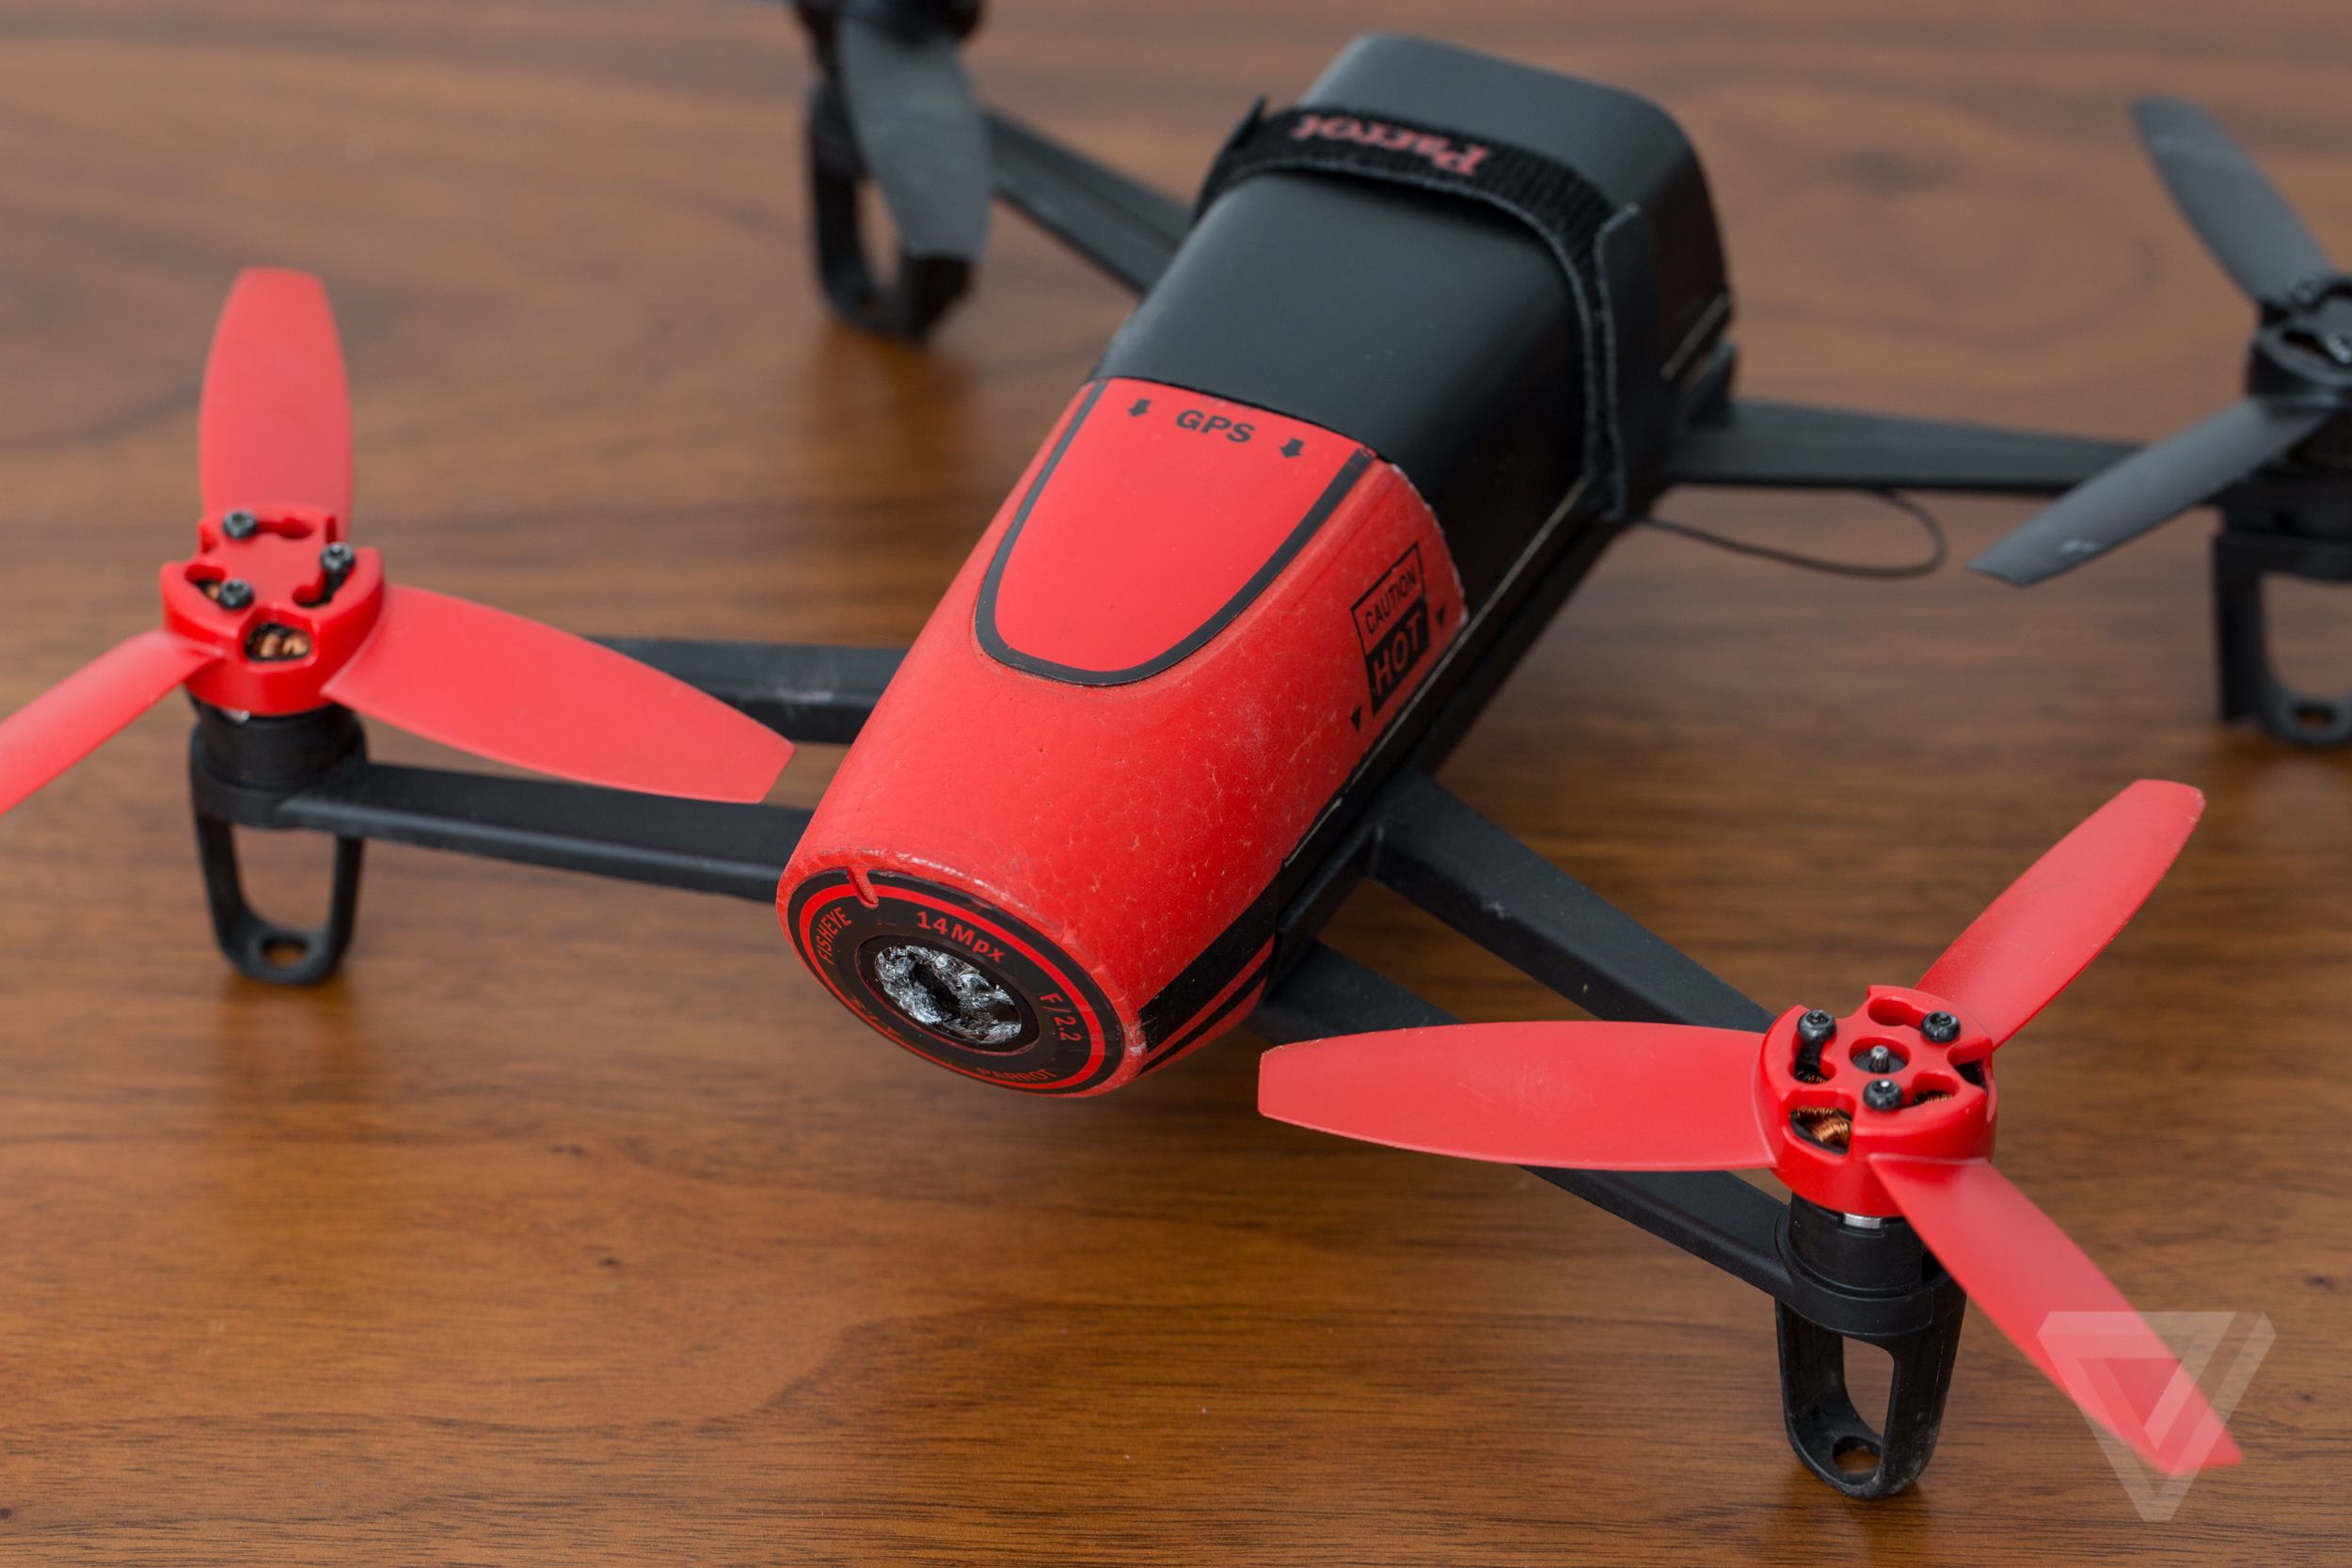 Parrot Bebop drone review: but dangerously inconsistent - The Verge